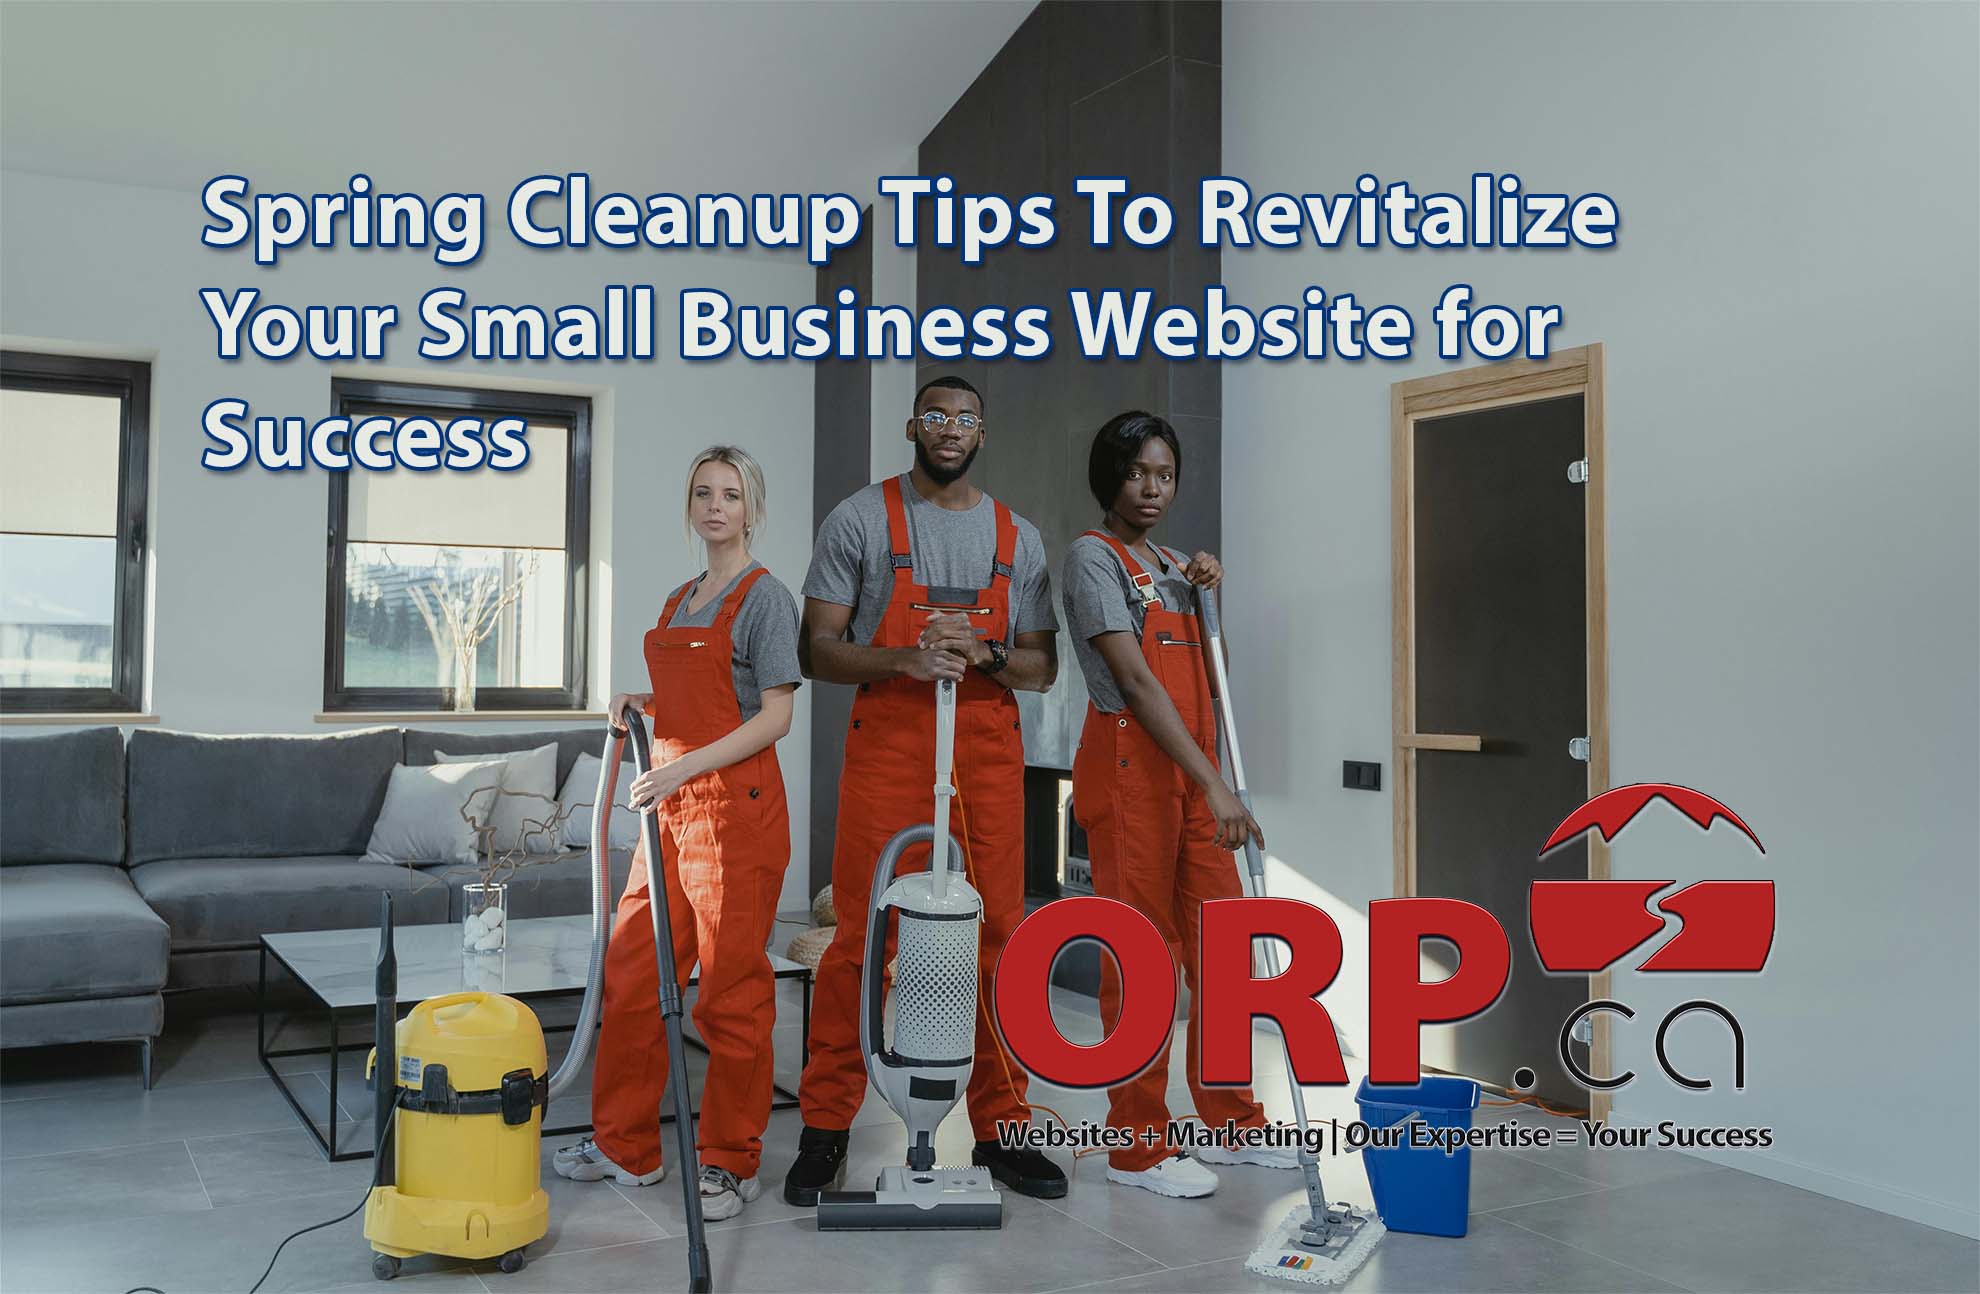 Spring Cleanup Tips To Revitalize Your Small Business Website for Success - a small business website maintenance article from ORP.ca, Your Small Business Website and Digital Marketing Services Provider